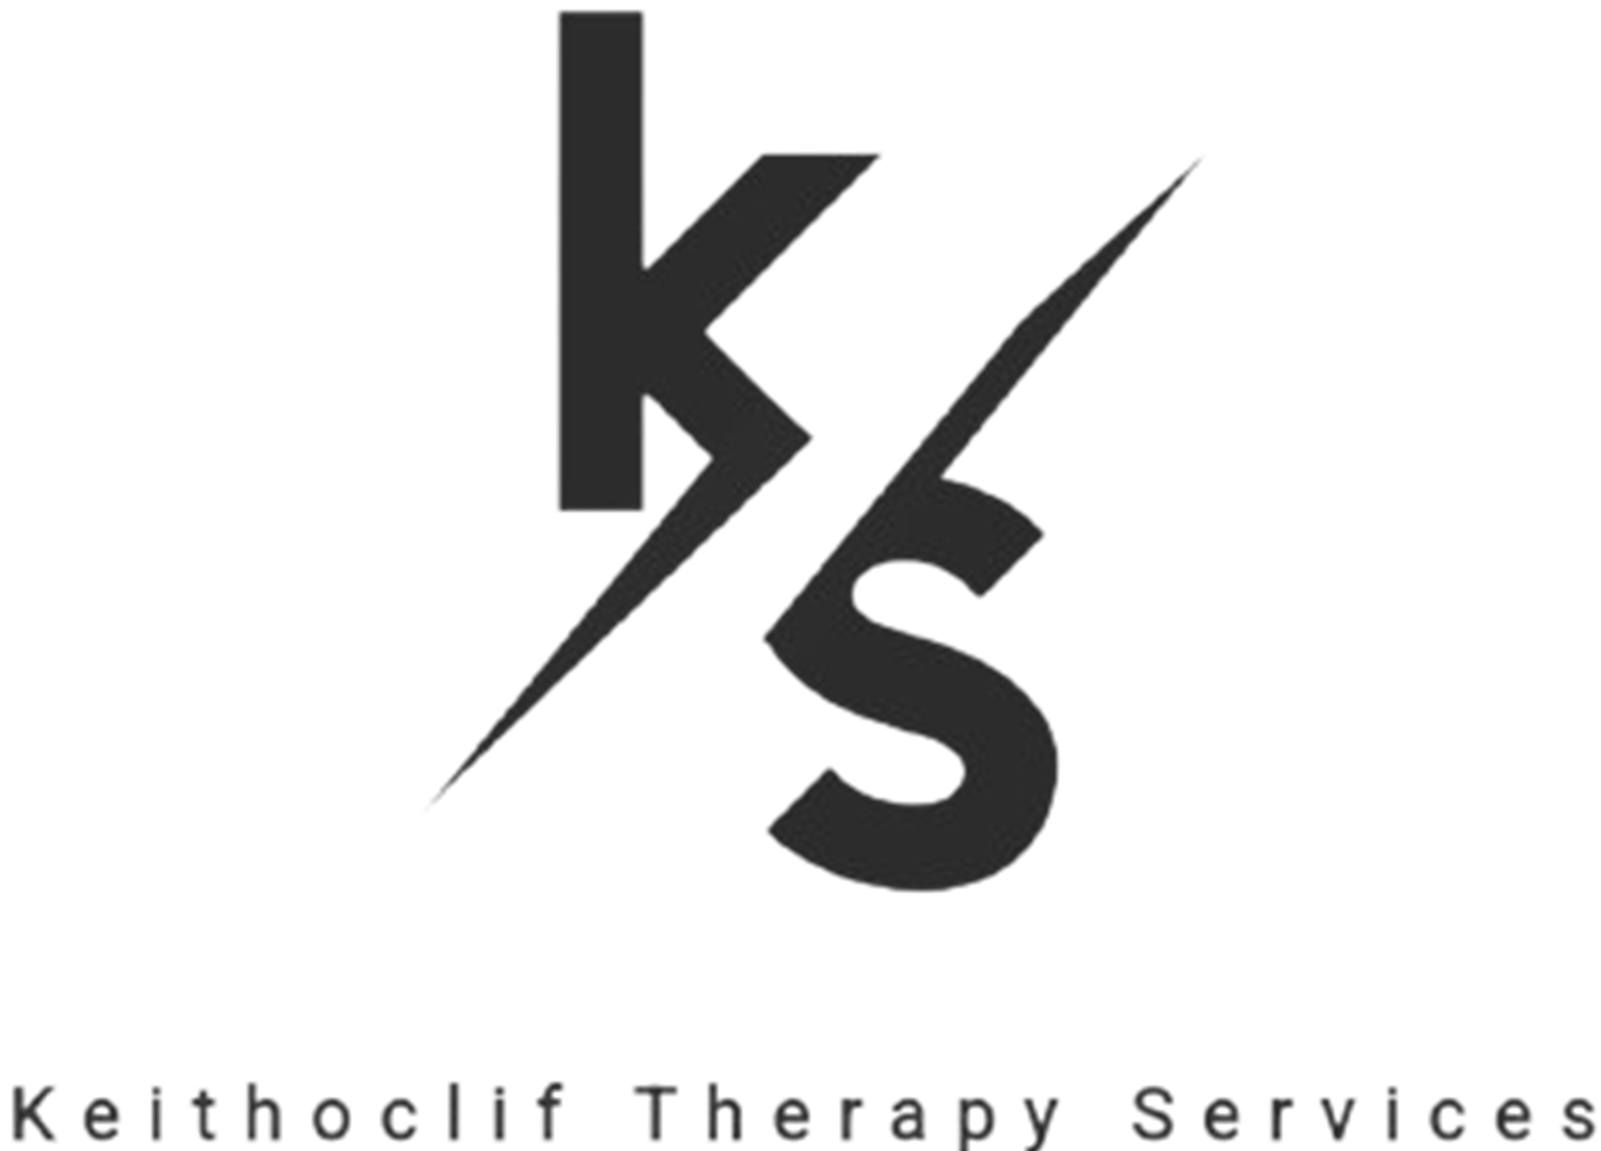 Keithoclif Therapy Services